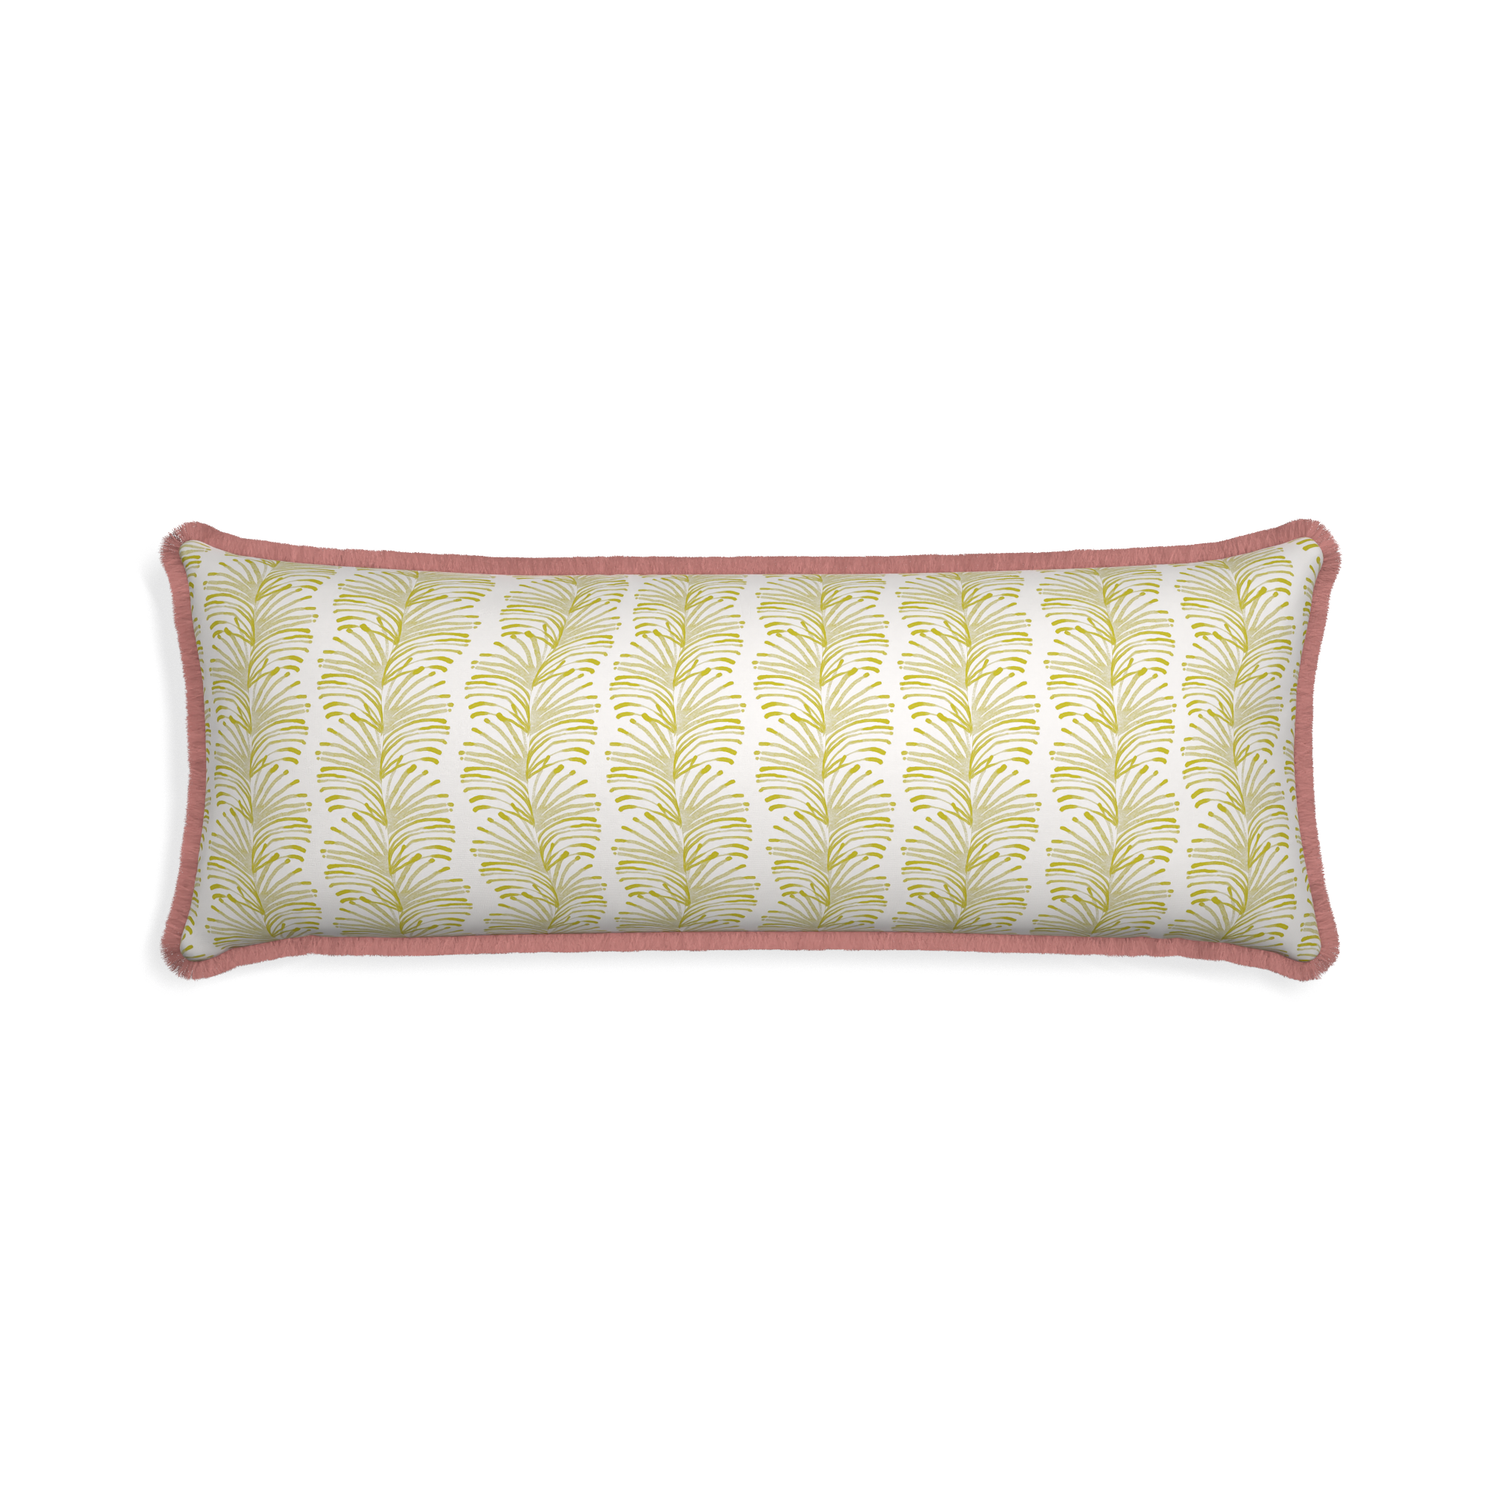 Xl-lumbar emma chartreuse custom pillow with d fringe on white background